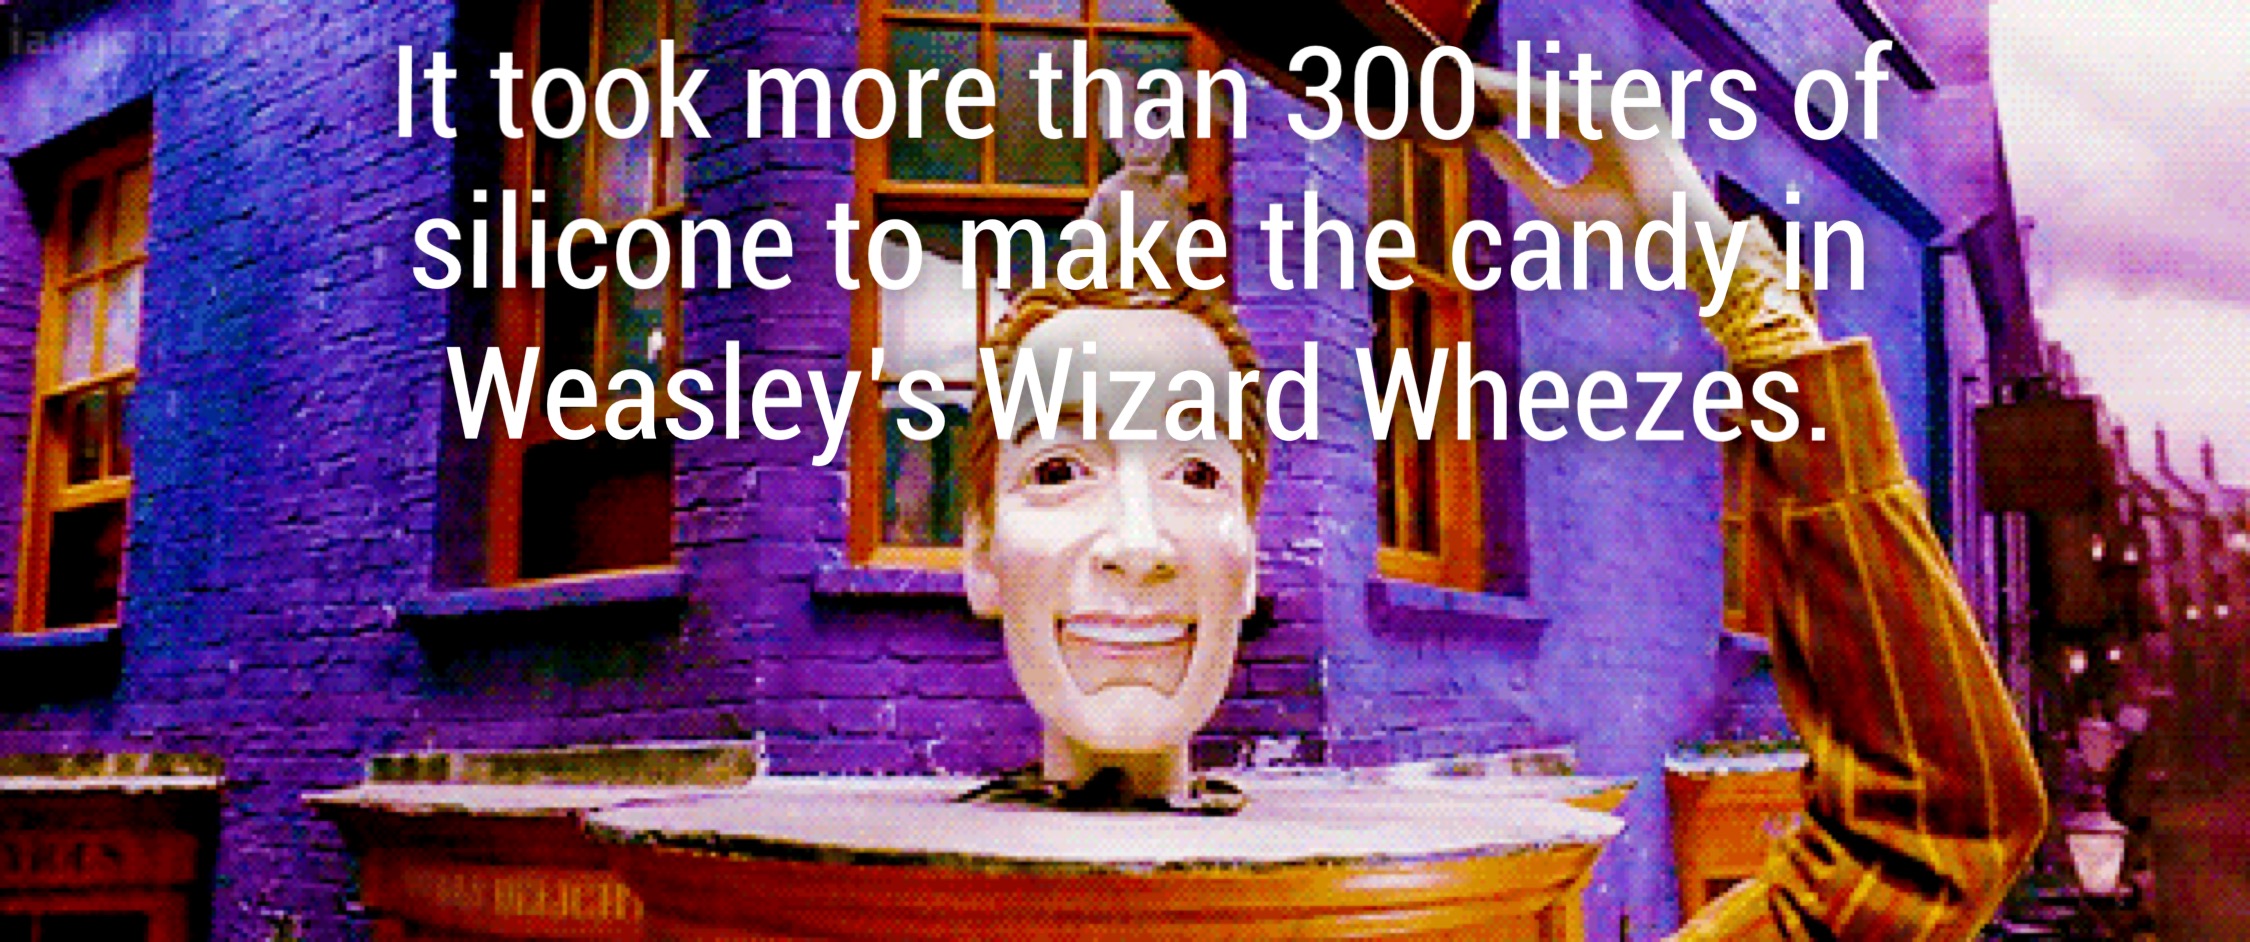 36 Harry Potter Facts That Made Us Love The Films Even More